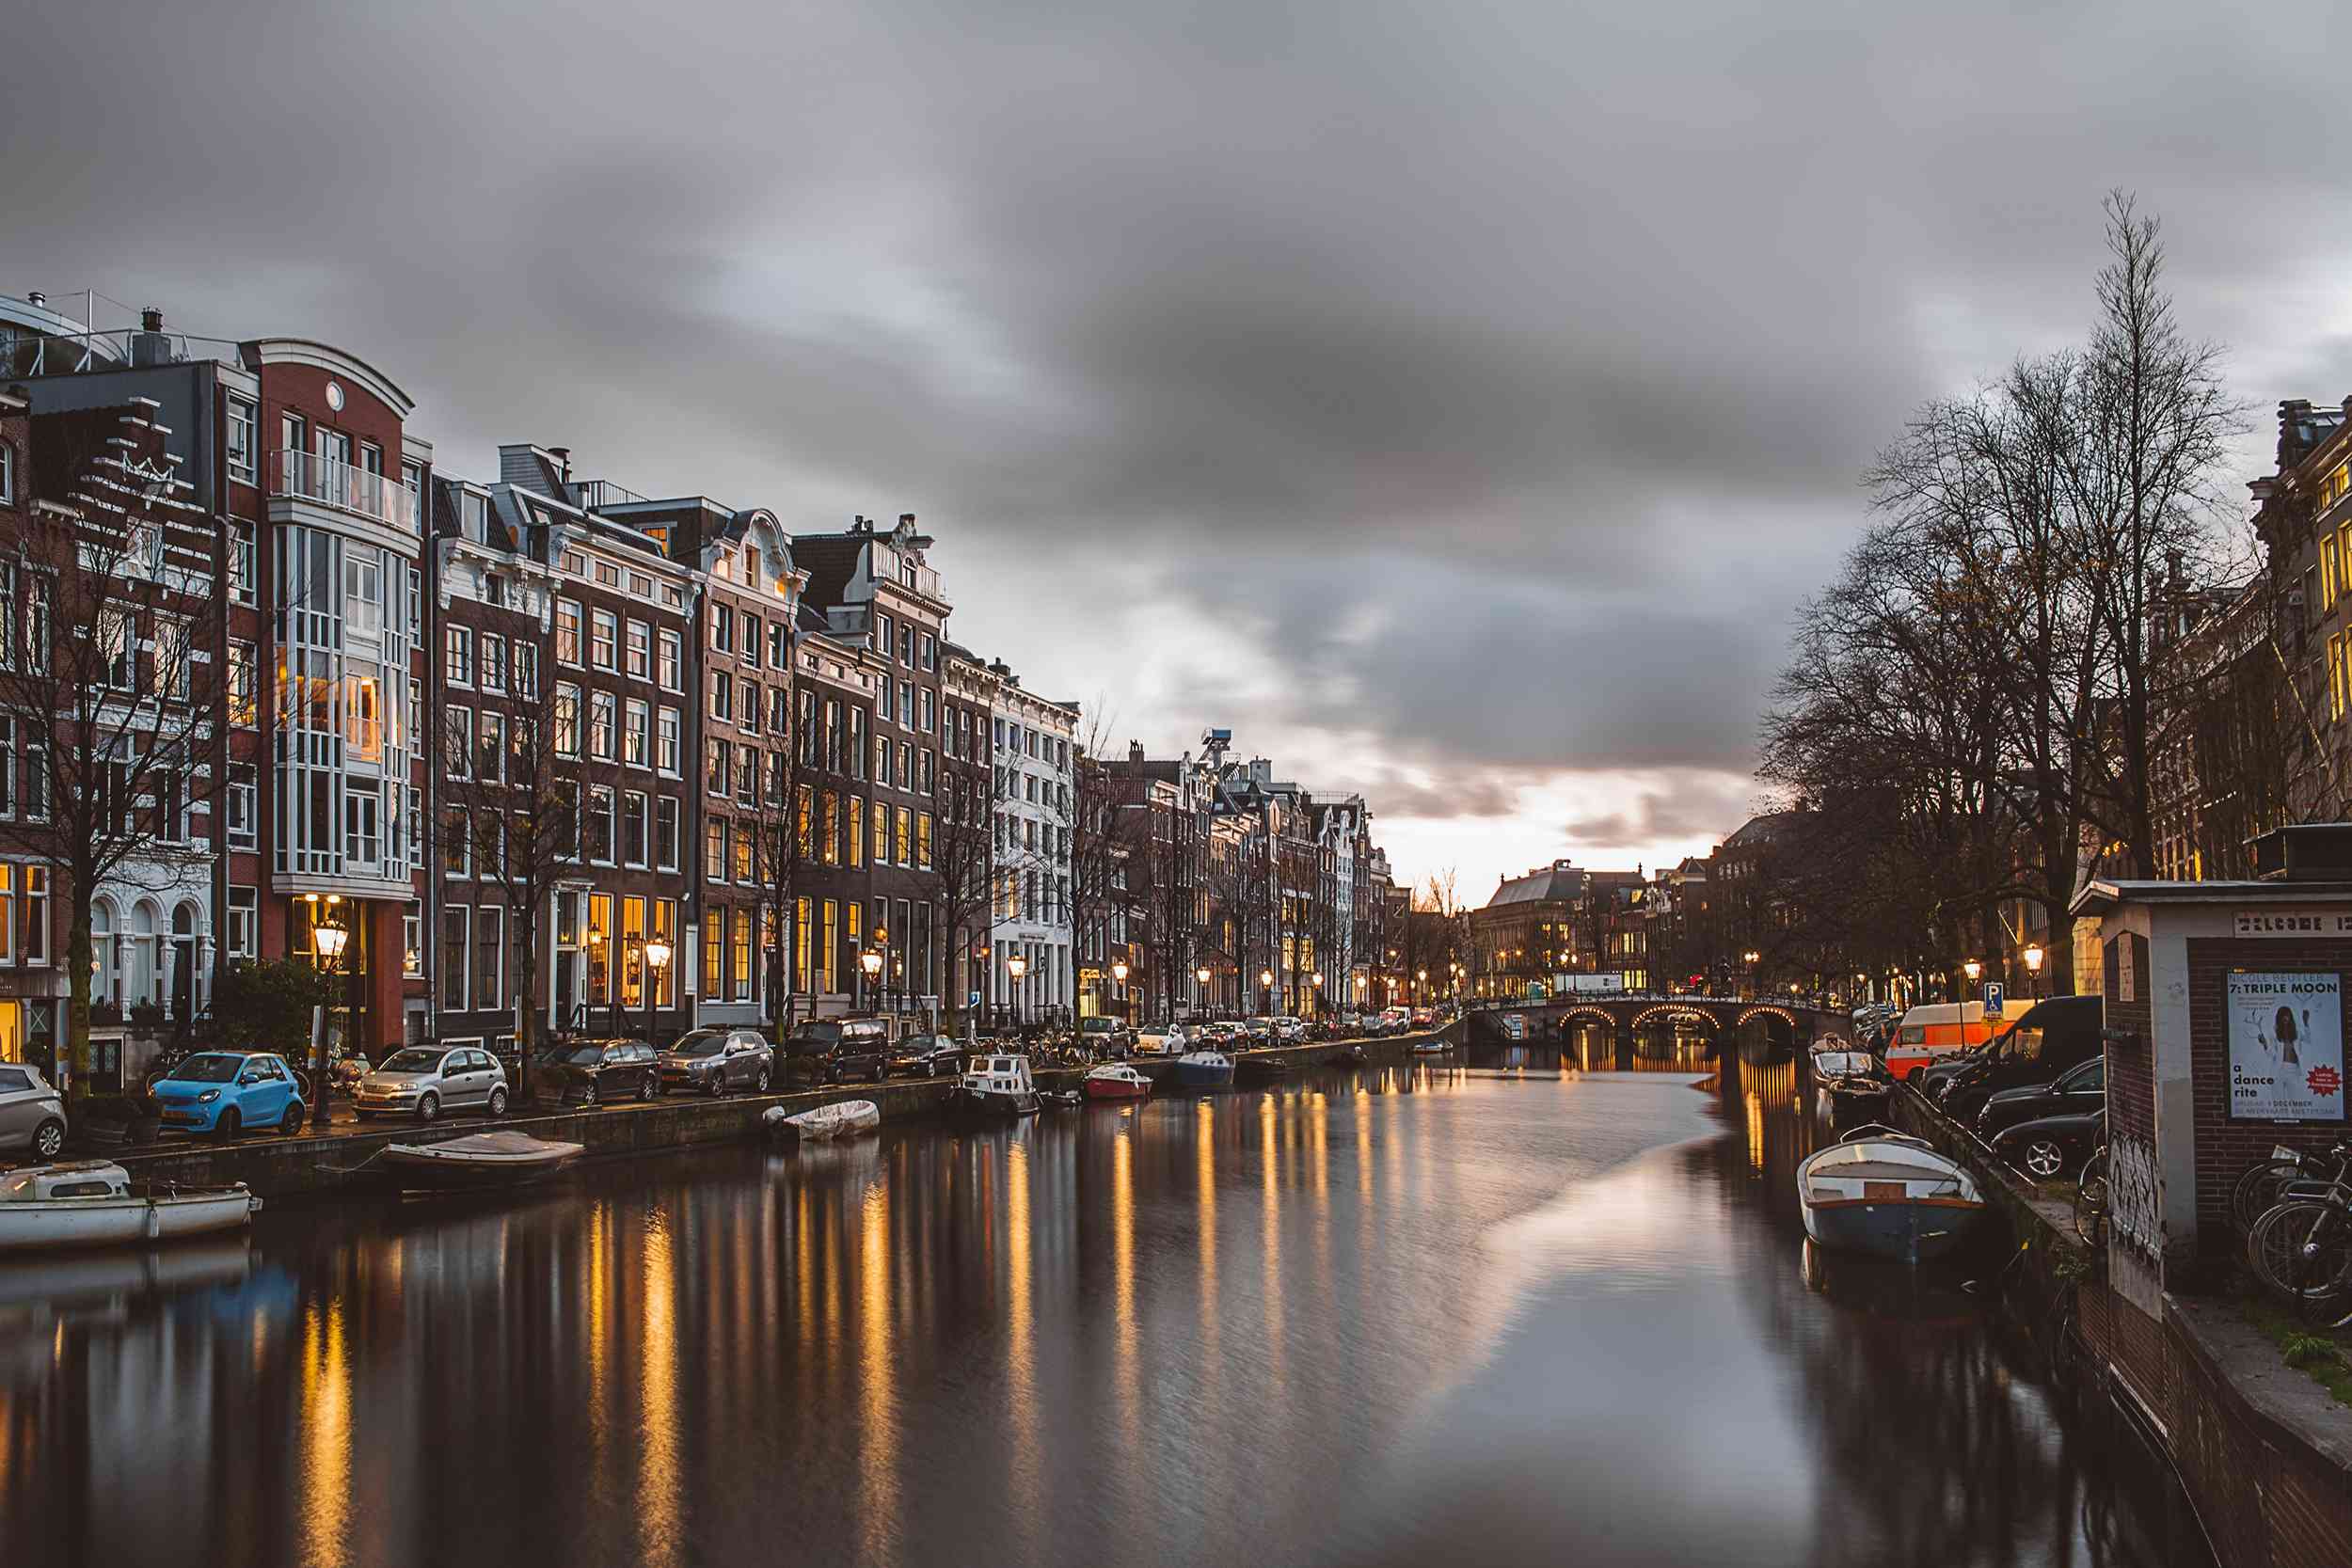 Is Amsterdam Tap Water Safe To Drink? Tap water & safety quality